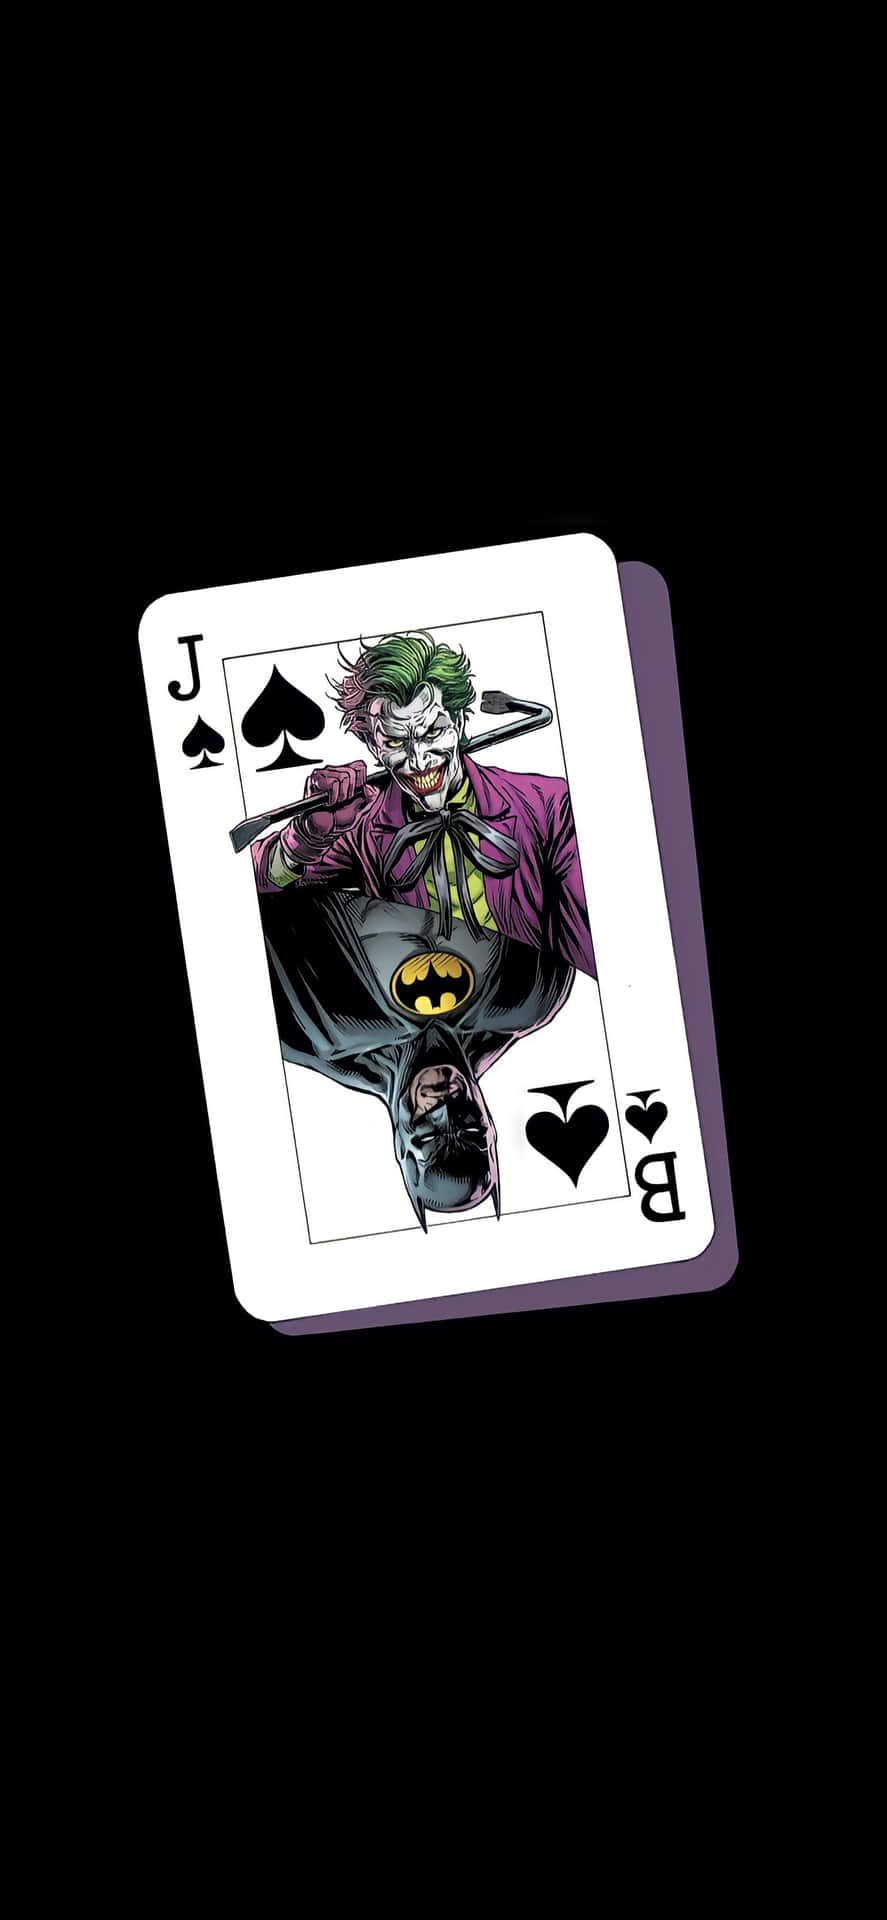 Caption: The Joker Card - Mysterious and Enigmatic Wallpaper